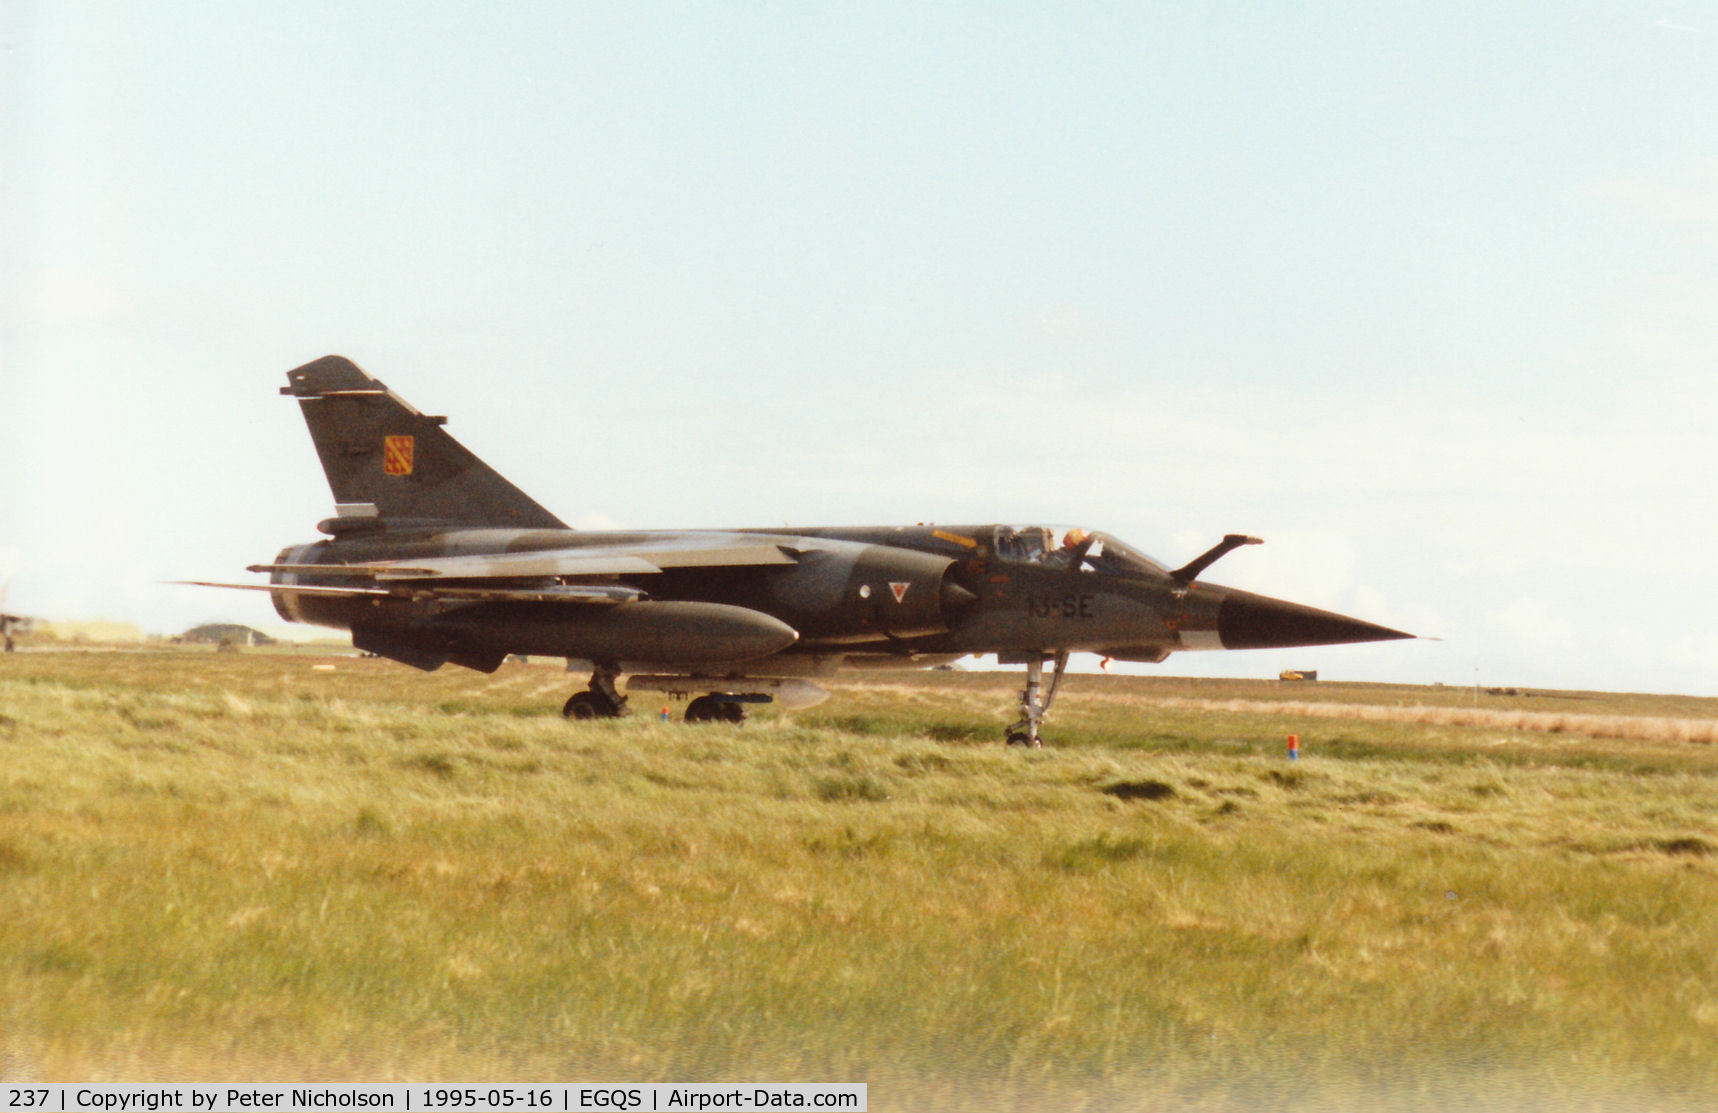 237, Dassault Mirage F.1CT C/N 237, Mirage F.1CT, callsign French Air Force 5722, of EC 1/3 taxying to the active runway at RAF Lossiemouth in the Summer of 1995.